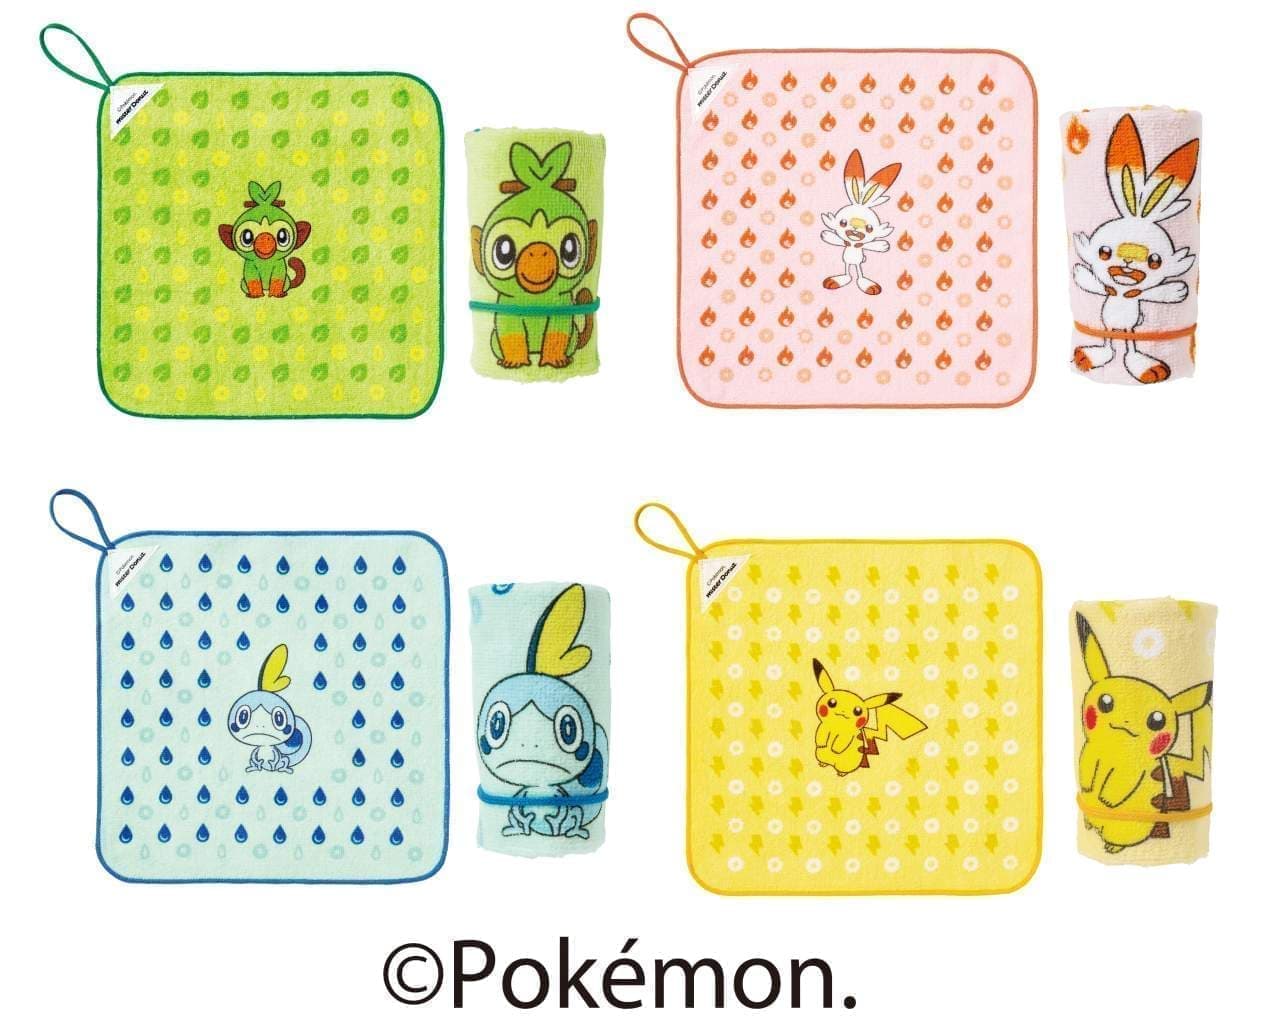 Missed "Pokemon Mascot Hand Towel" in limited quantity